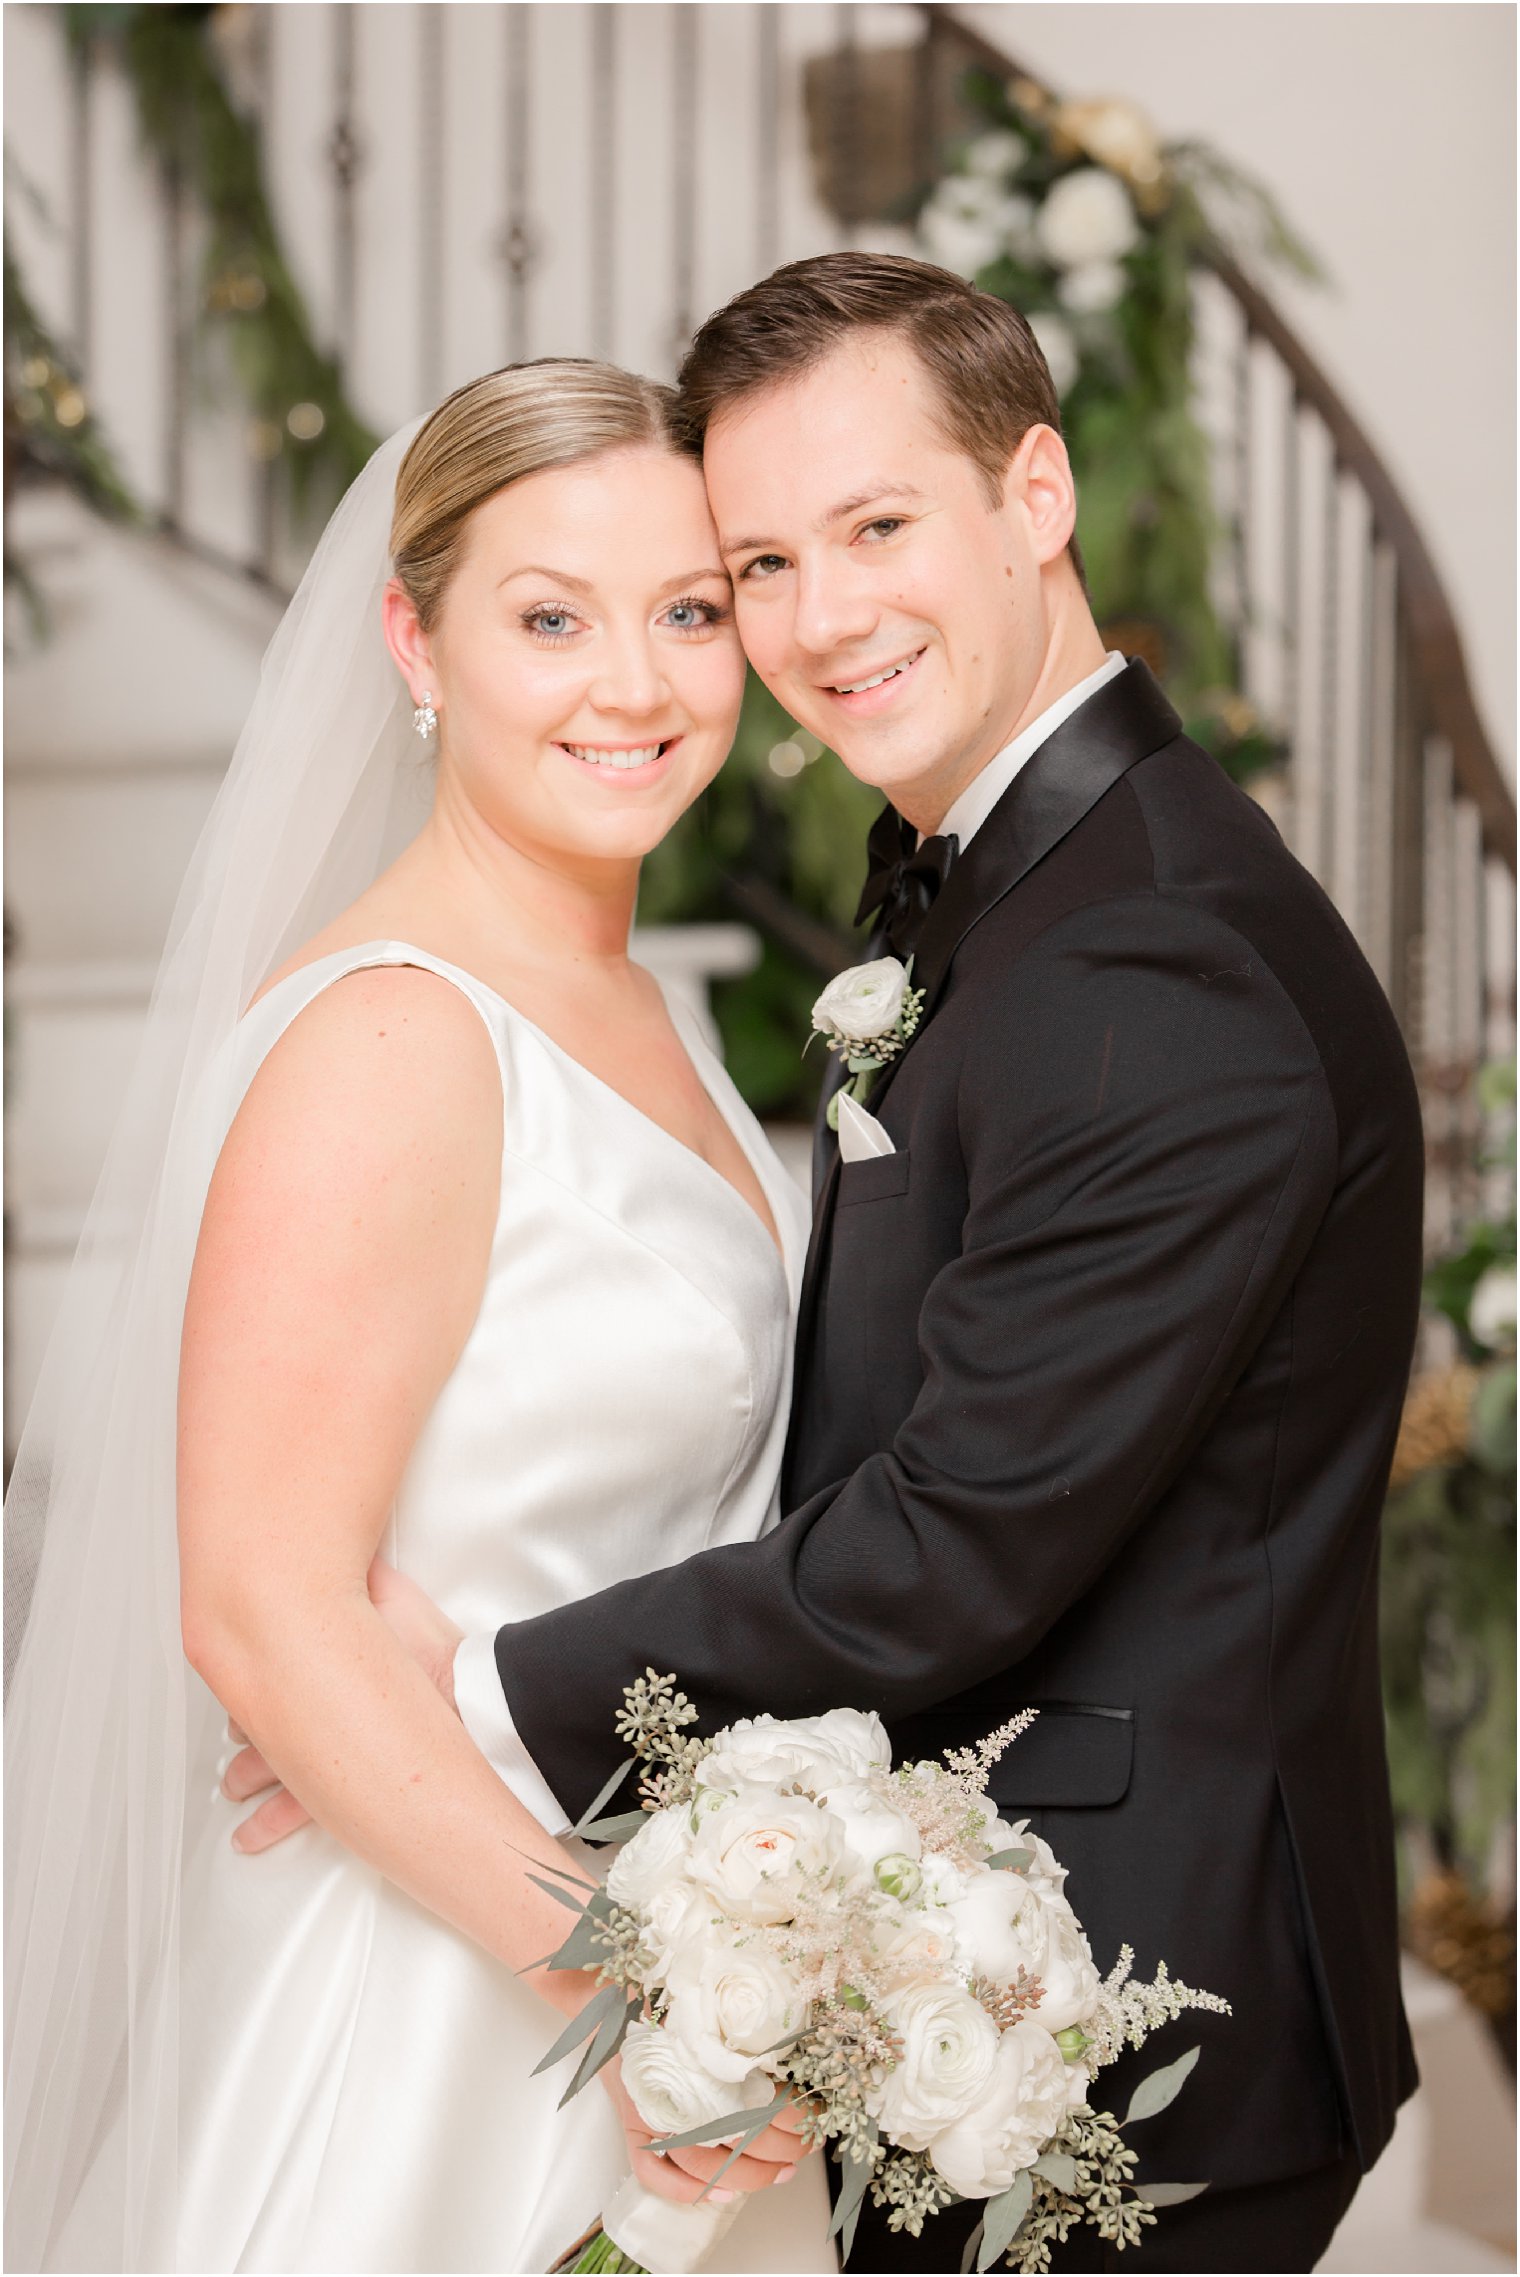 classic portrait of bride and groom at Pleasantdale Chateau